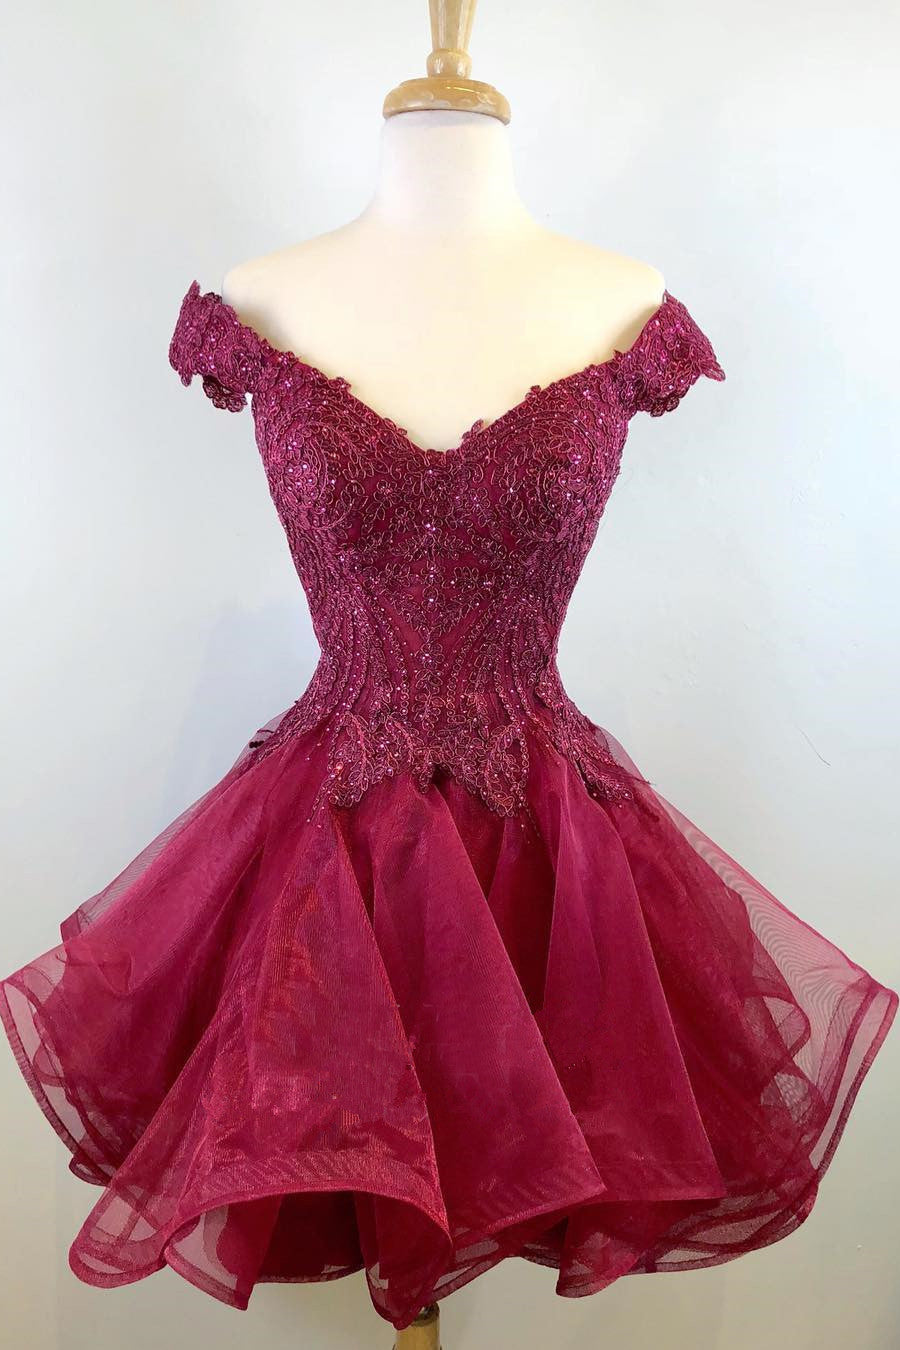 Princess Off the Shoulder Wine Red Short Corset Homecoming Dress outfit, Bridesmaid Dresses Mismatched Summer